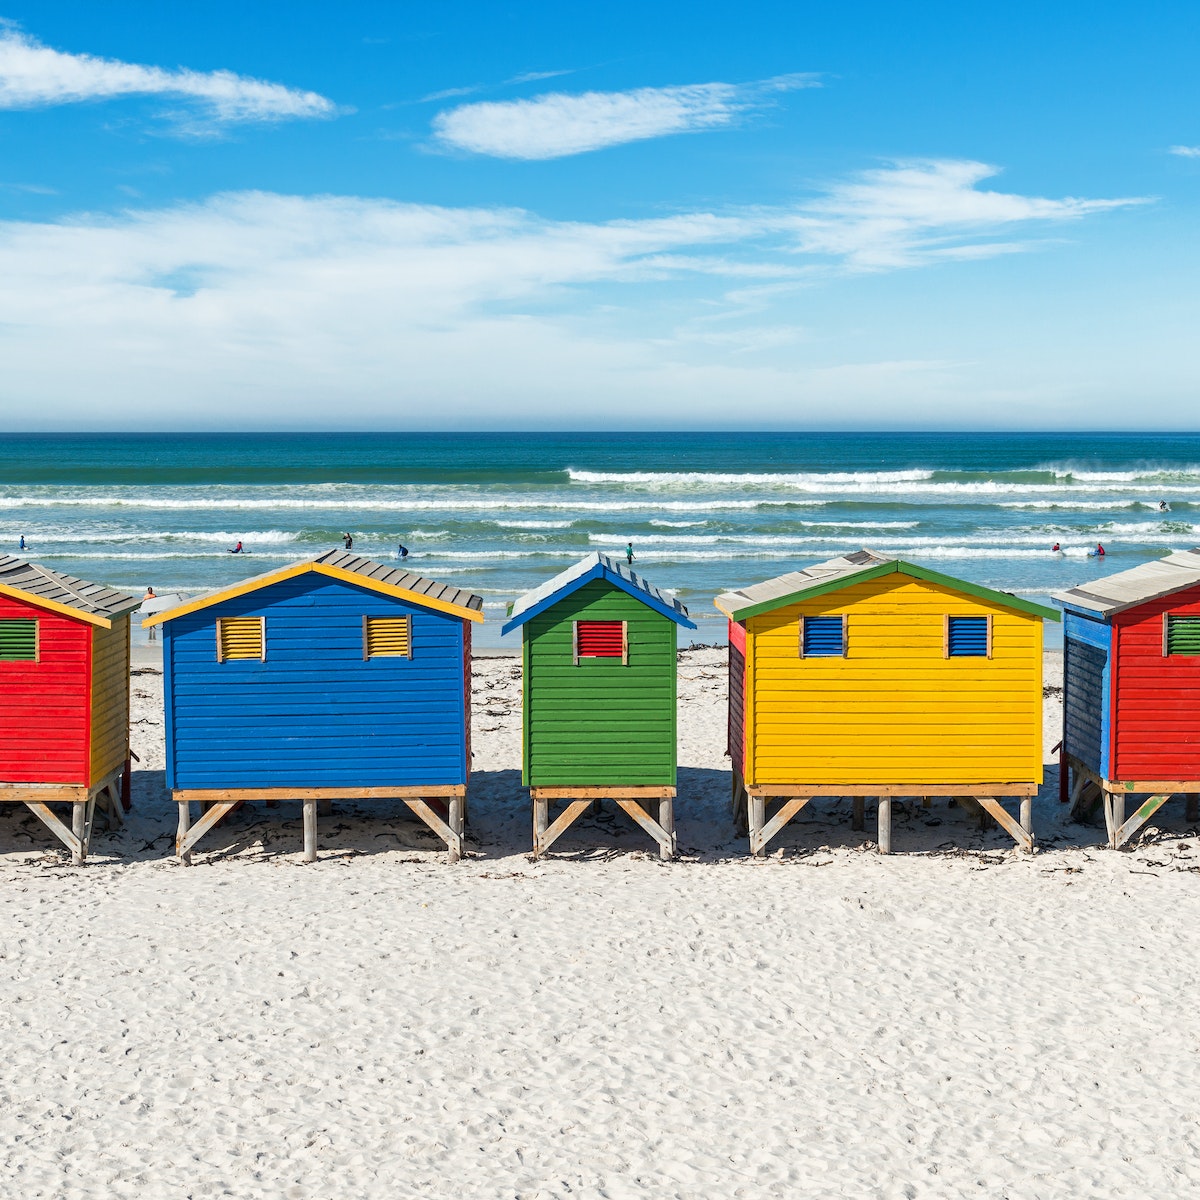 The famous beach of Muizenberg with its colorful beach huts.